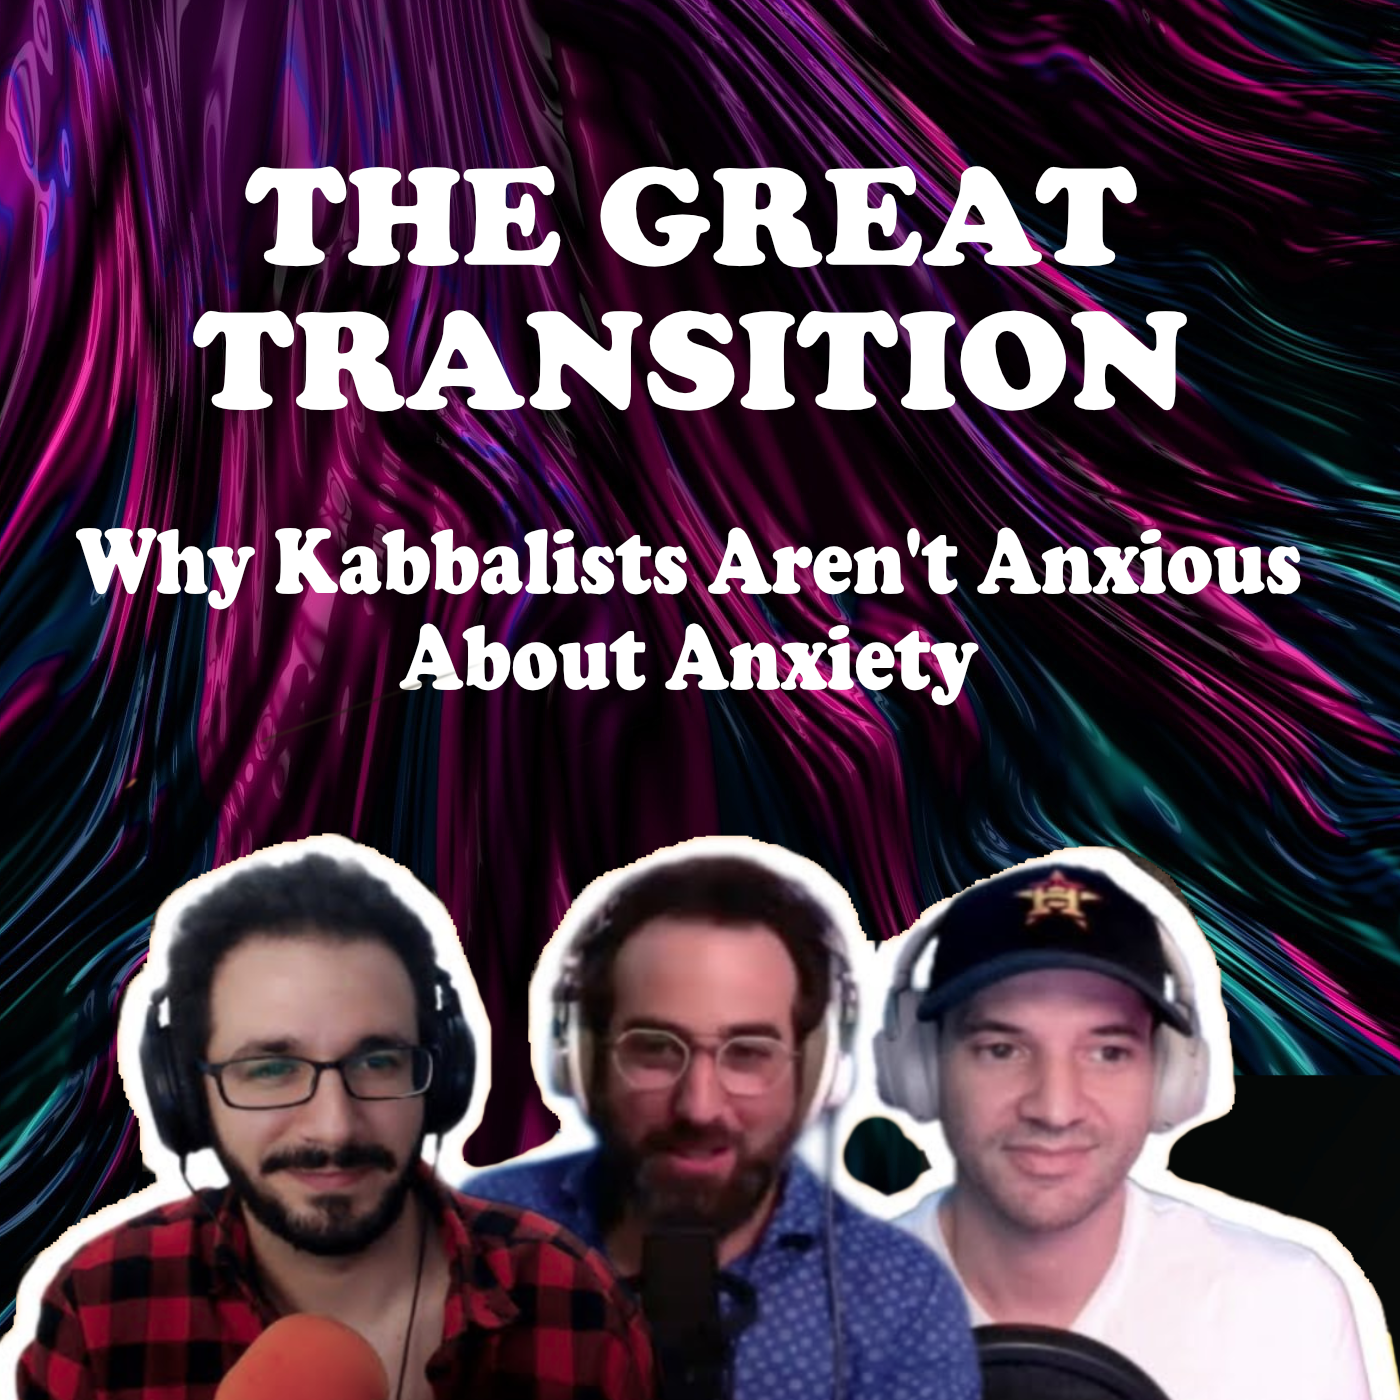 The Great Transition - Why Kabbalists Aren't Anxious About Anxiety